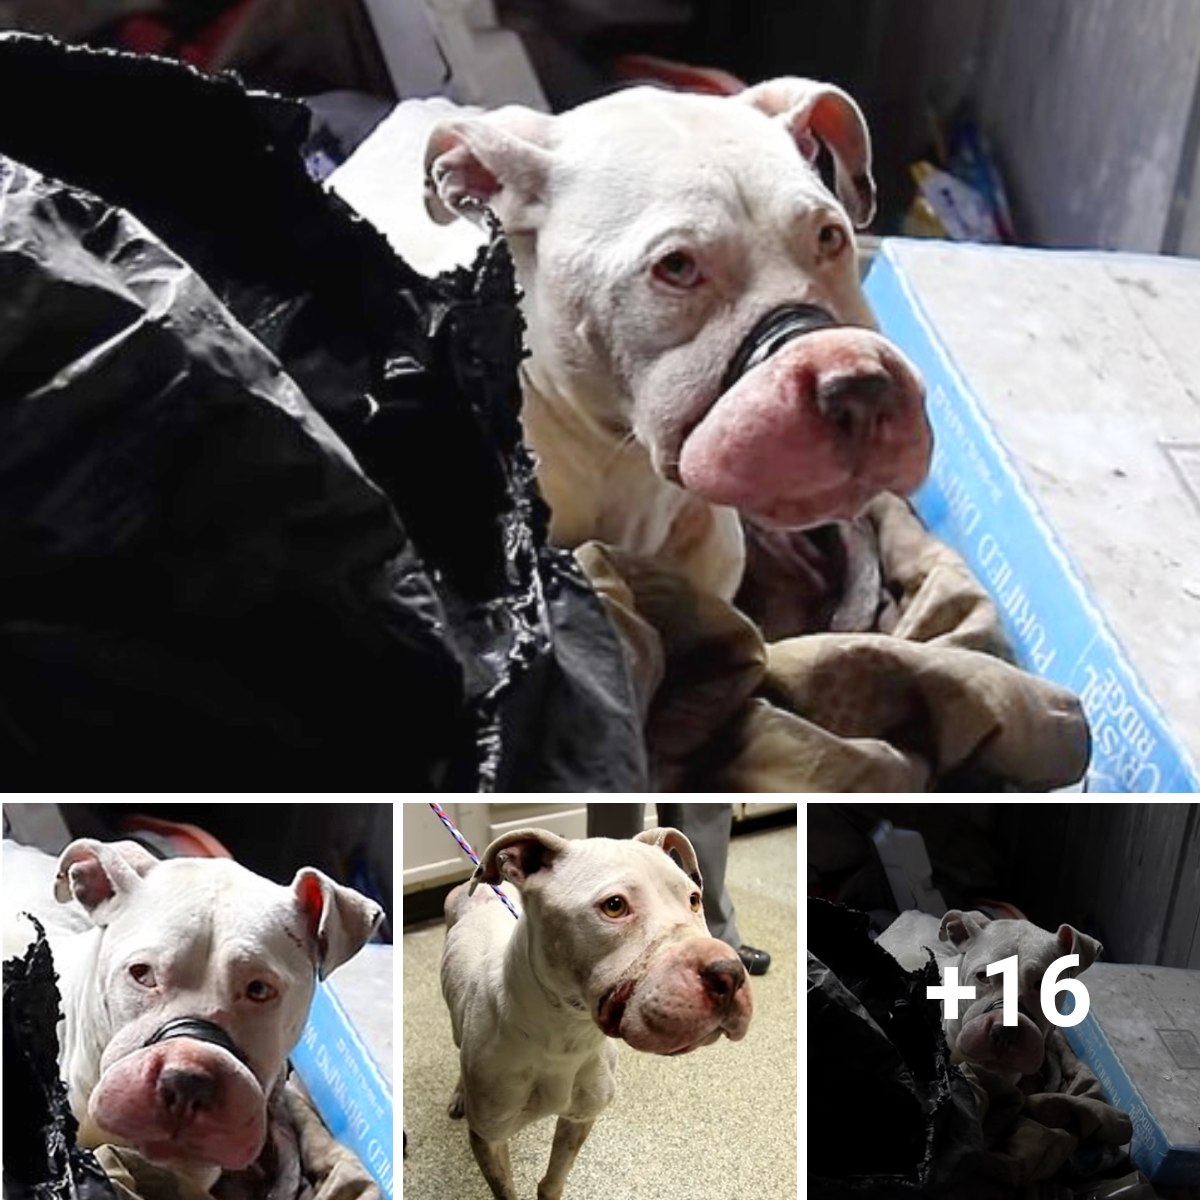 Get an up close and personal look at the efforts being made to save these poor dogs.